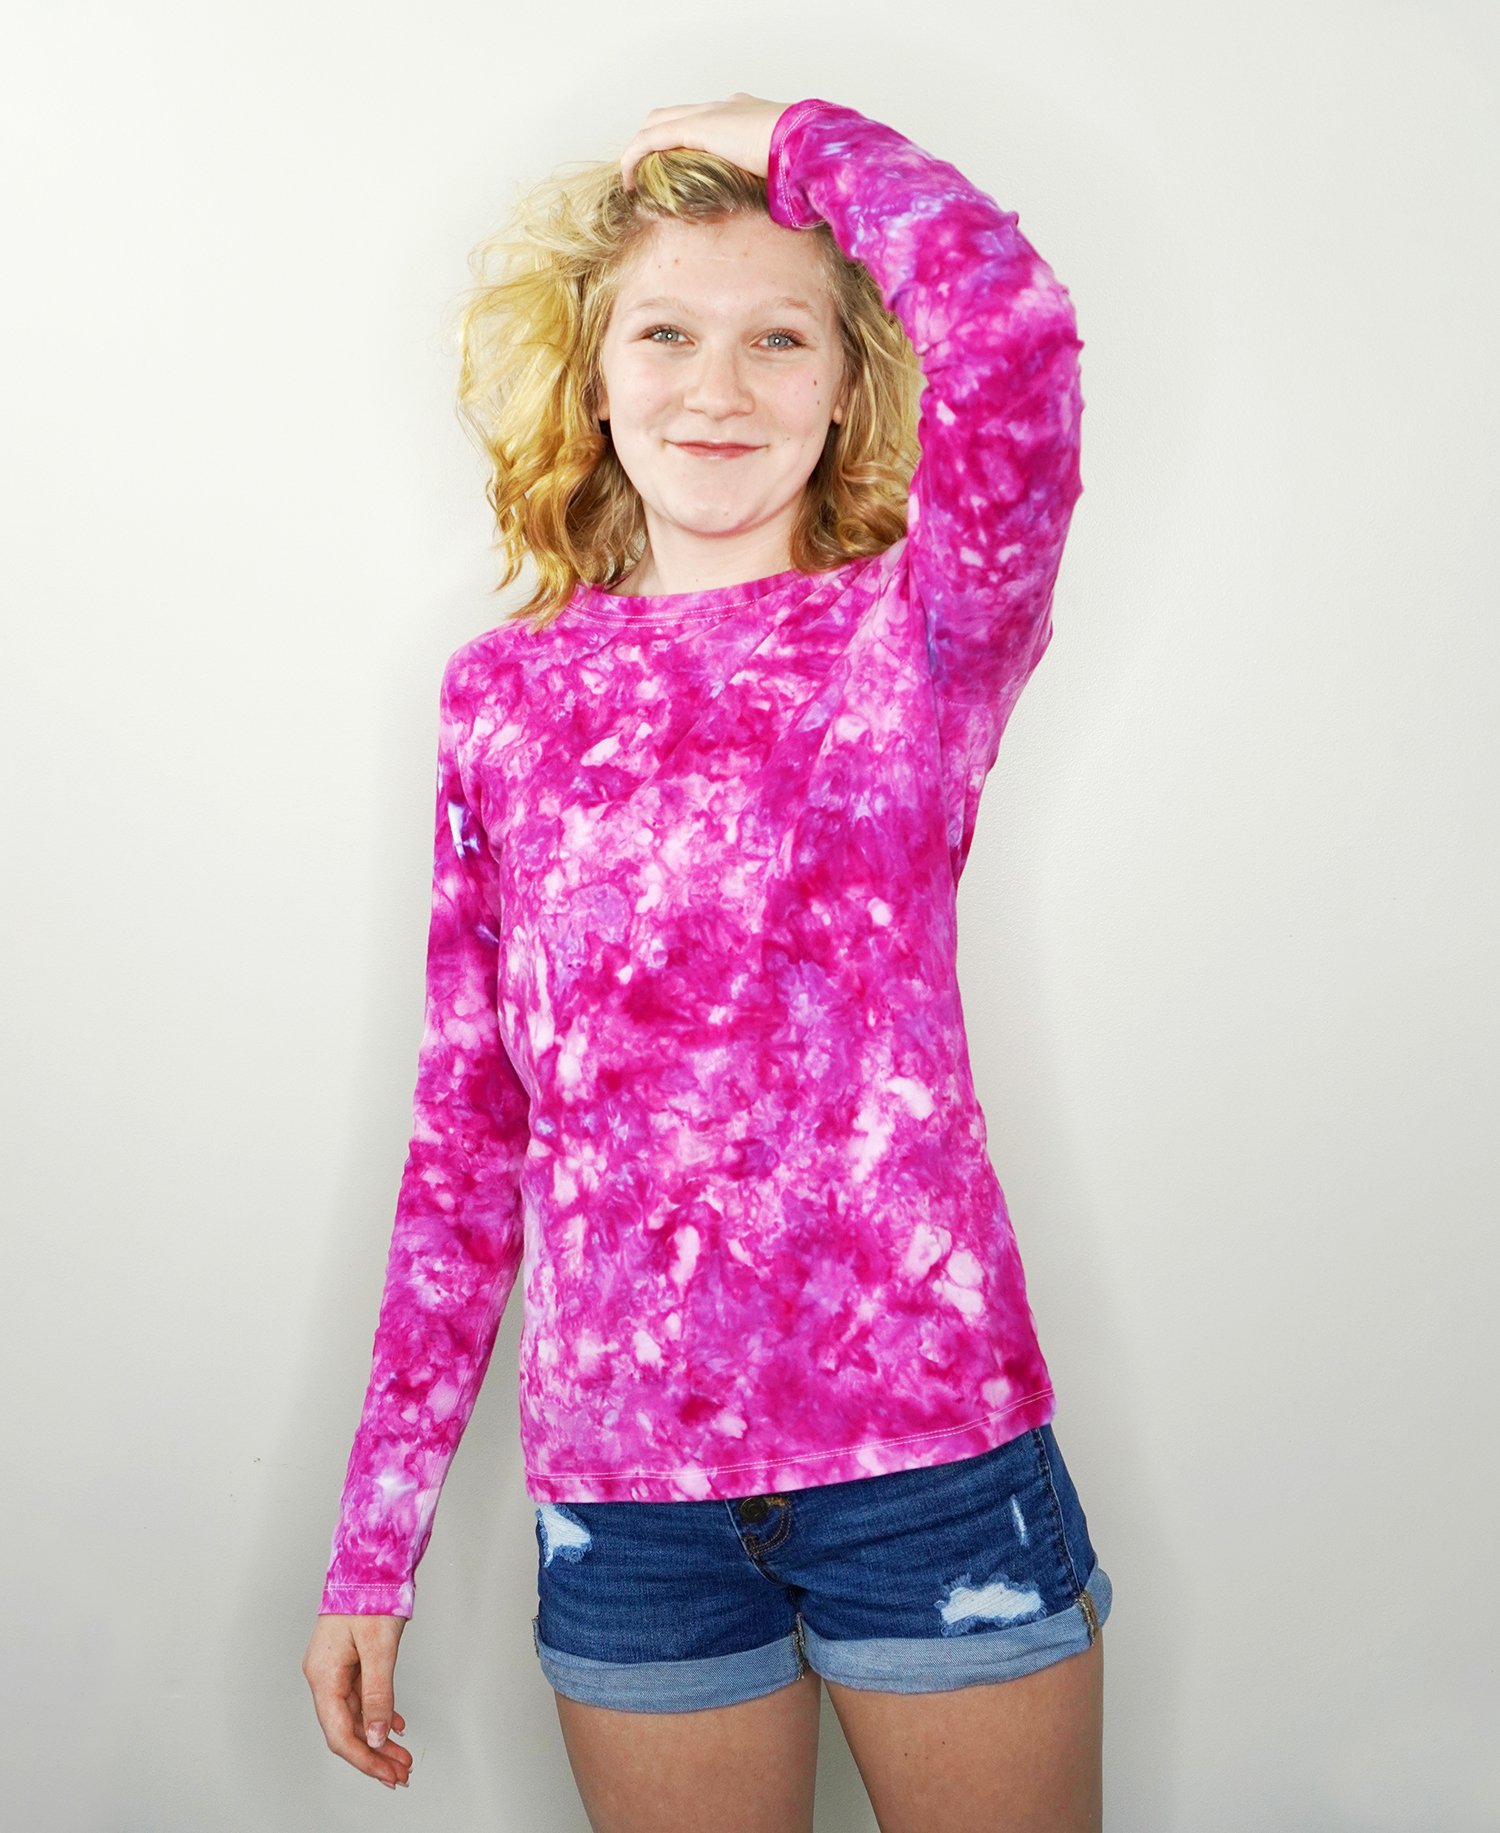 Blonde teen girl wearing a pink and purple ice dyed long sleeved shirt and denim shorts